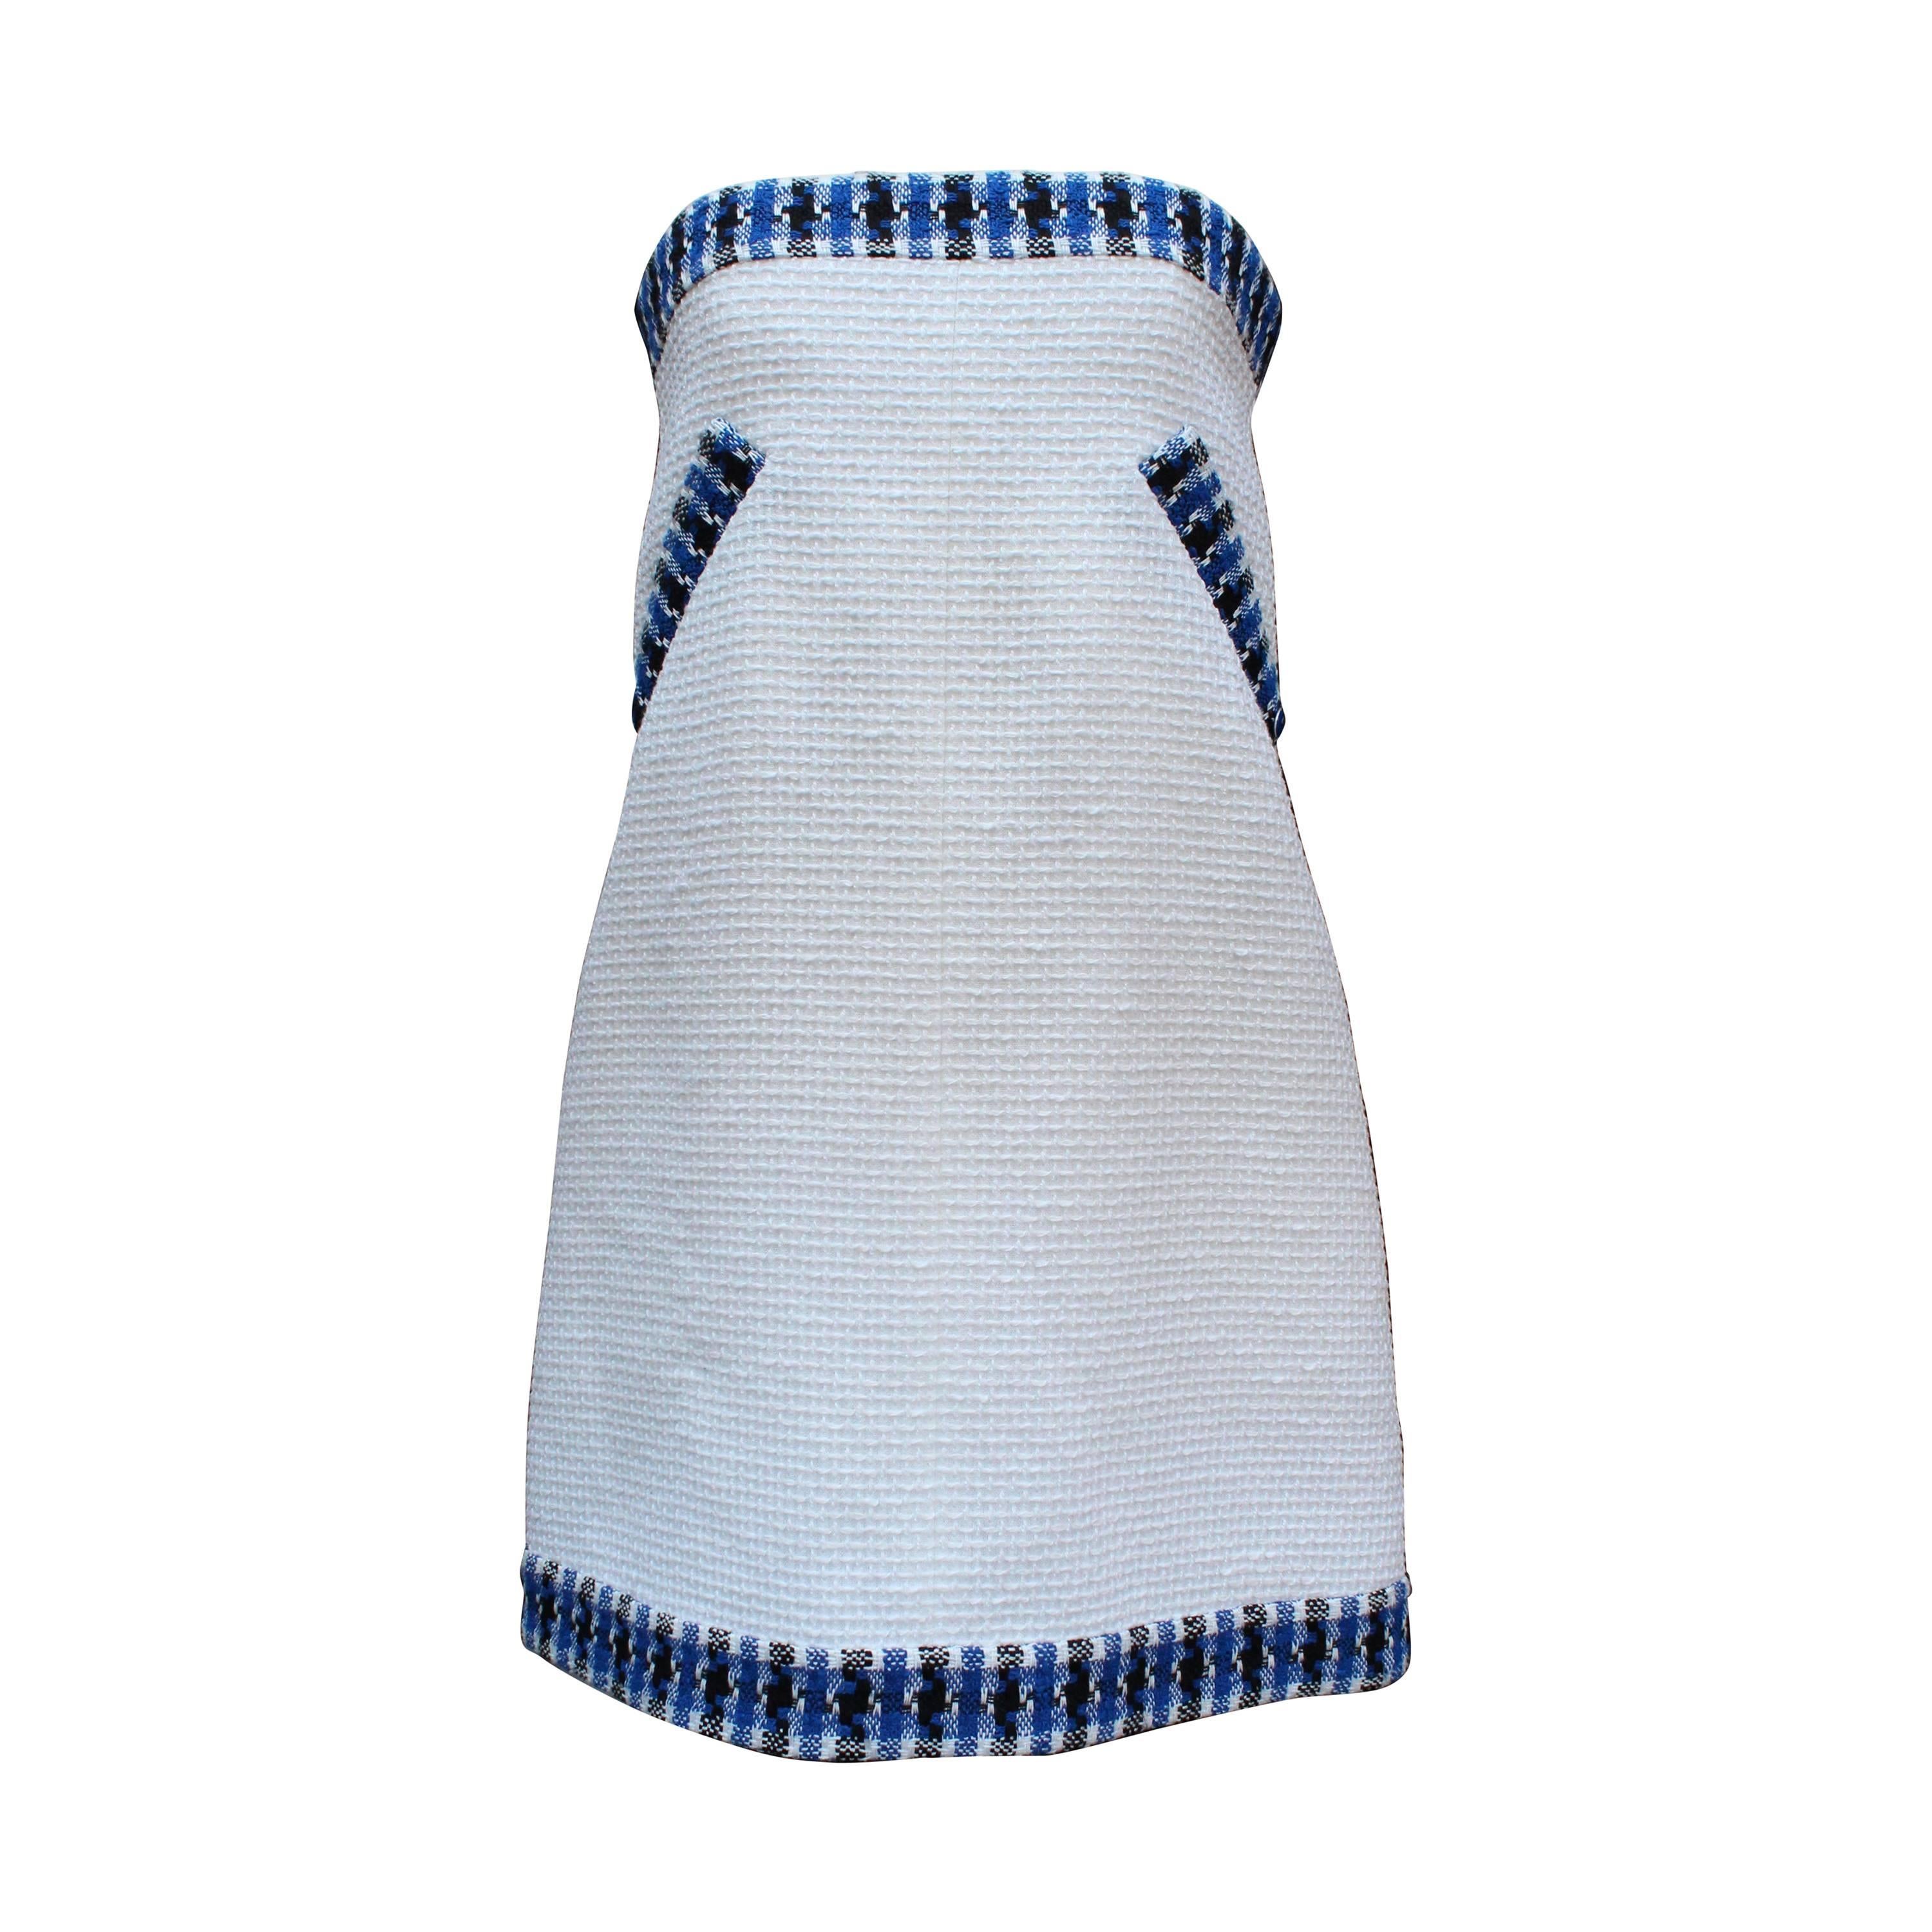 2013 Chanel Strapless Dress in White Blue and Black Cotton